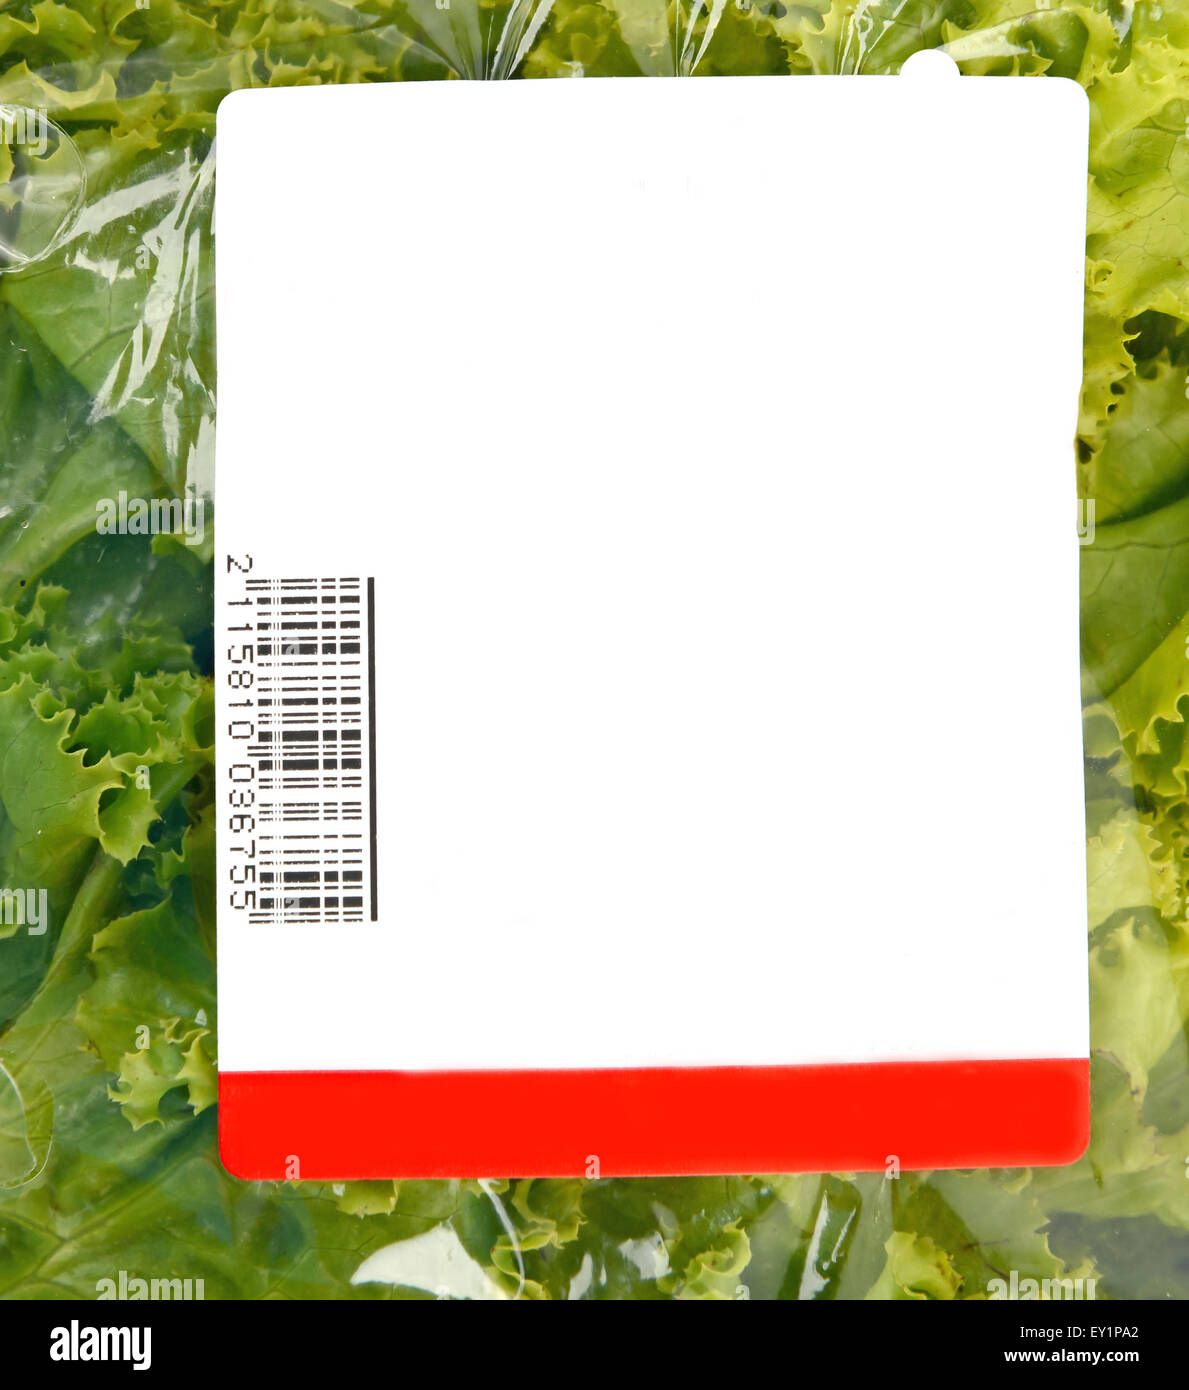 iceberg lettuce in plastic bag package with price tag Stock Photo